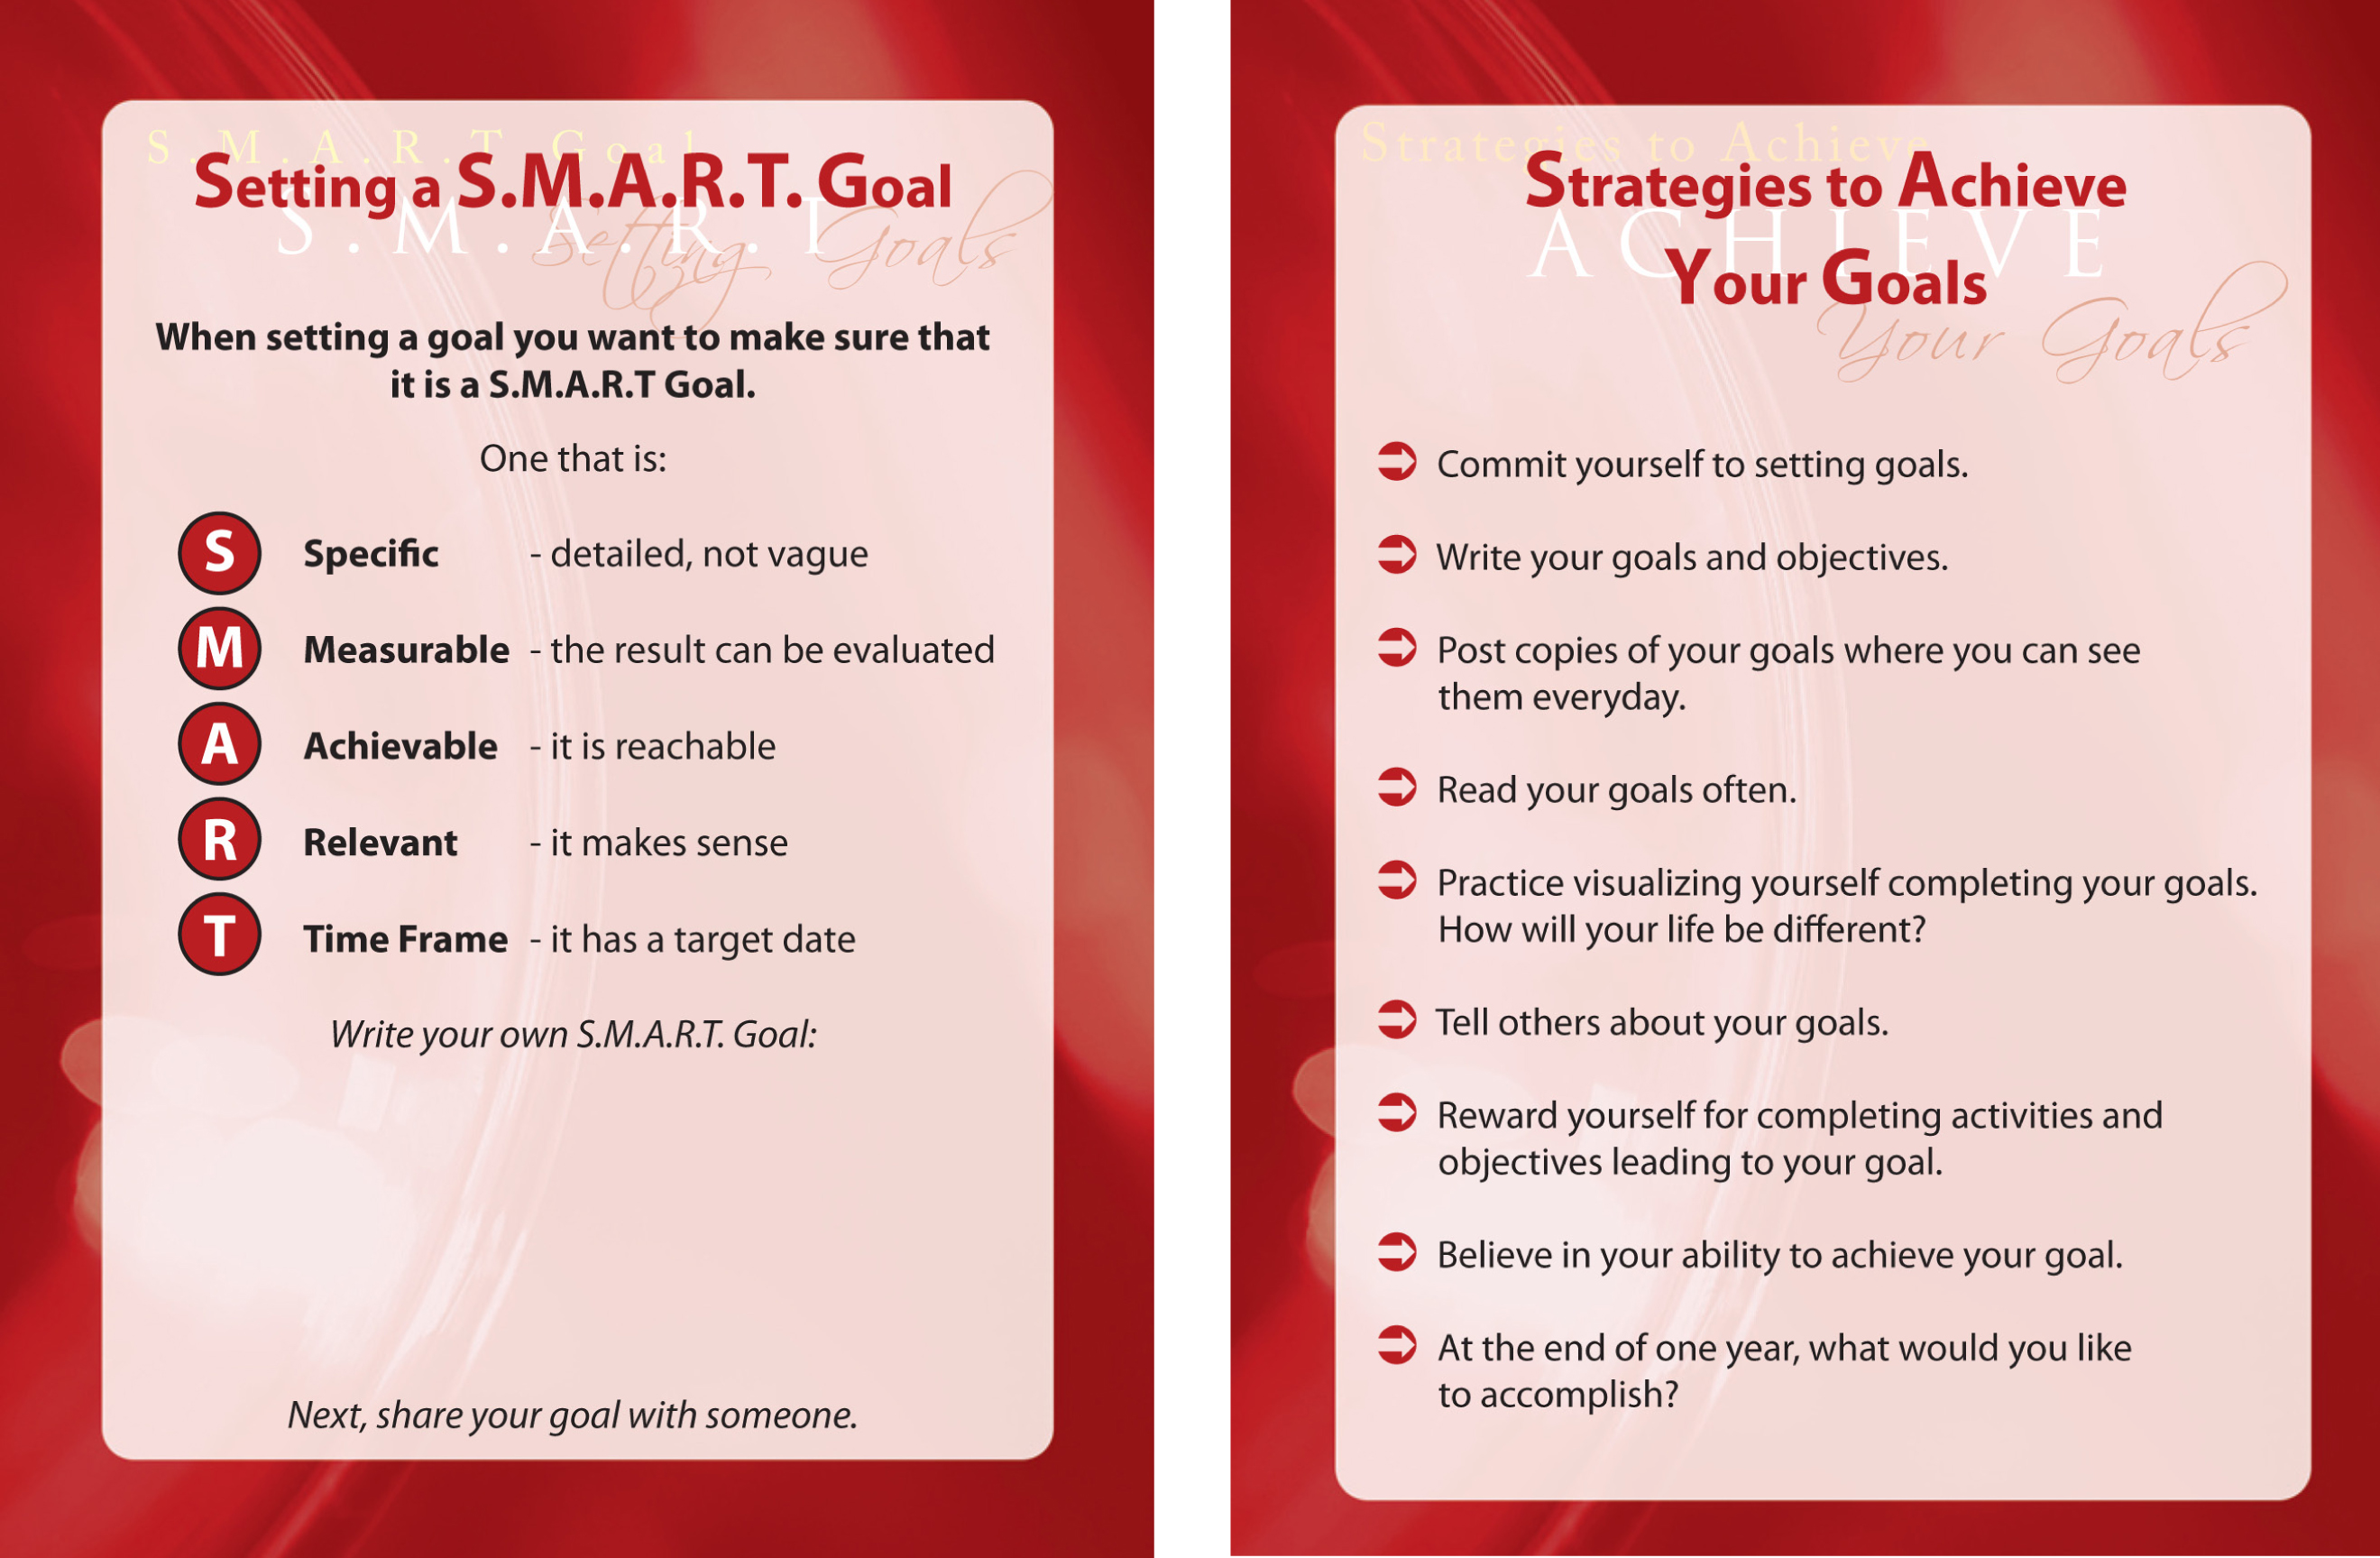 Go for the Goals in Your Statement of Purpose